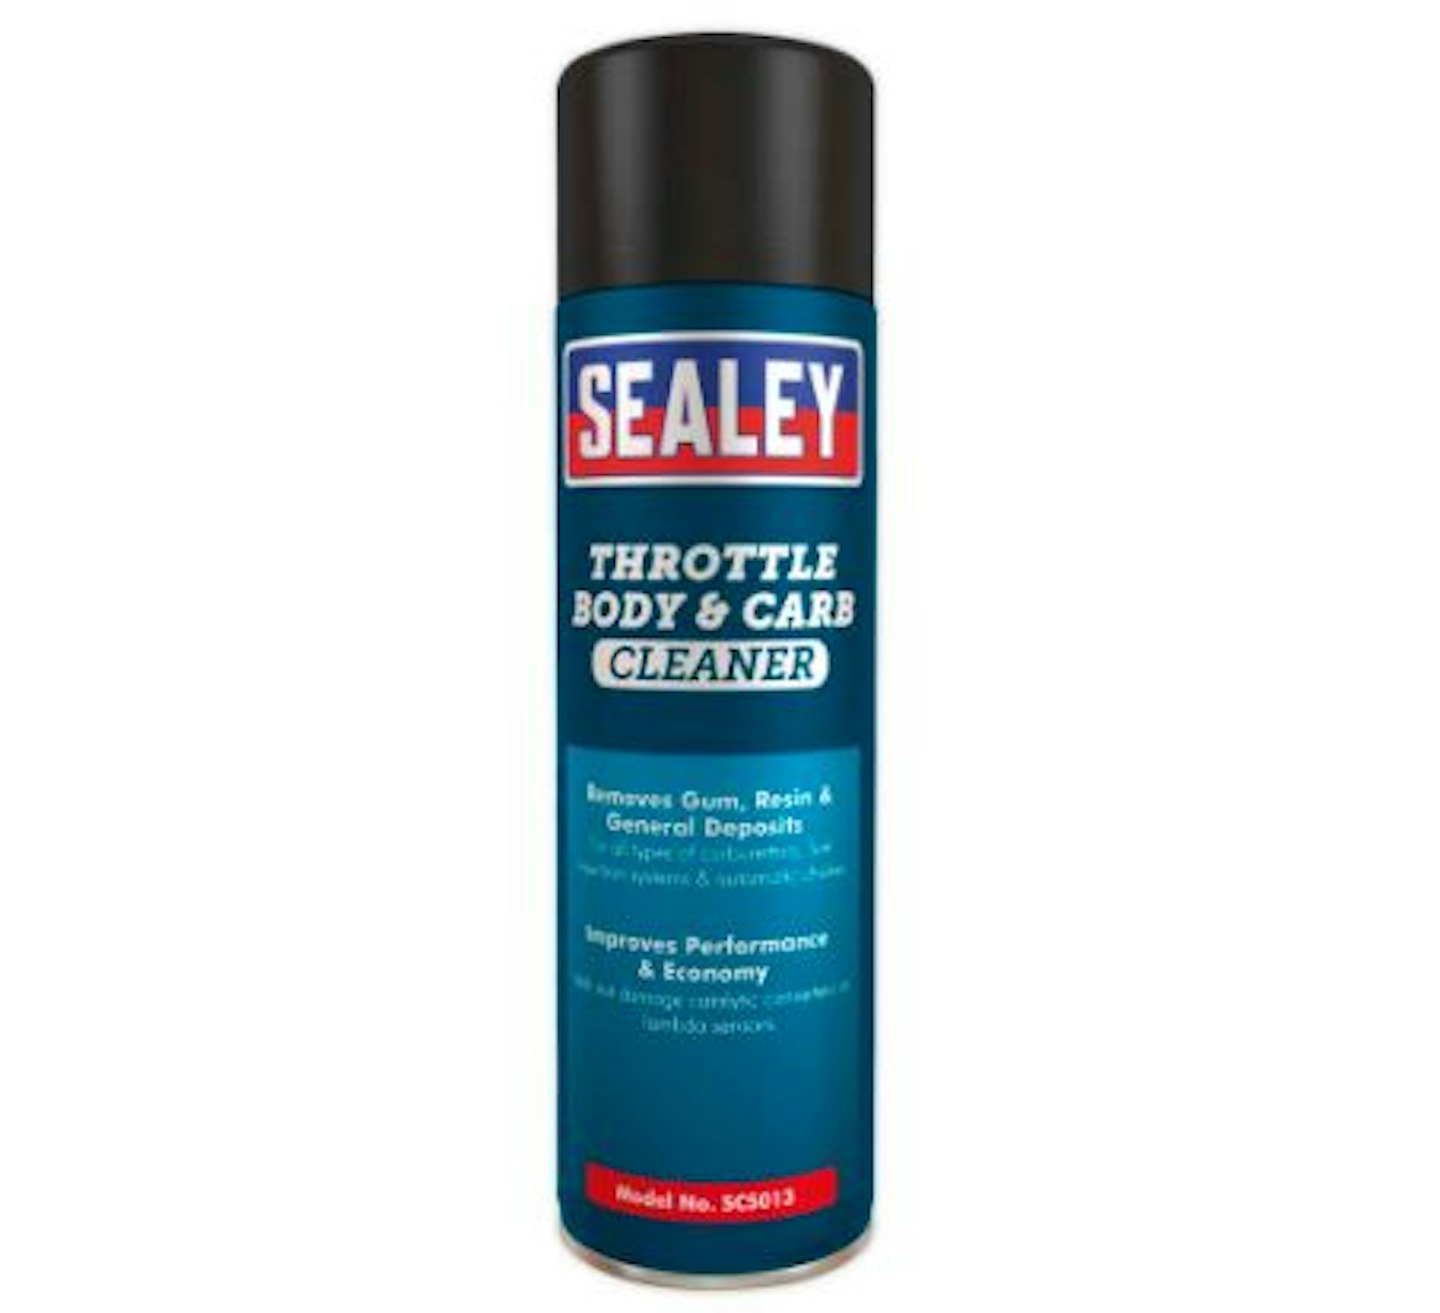 Sealey Throttle Body & Carb Cleaner 500ml